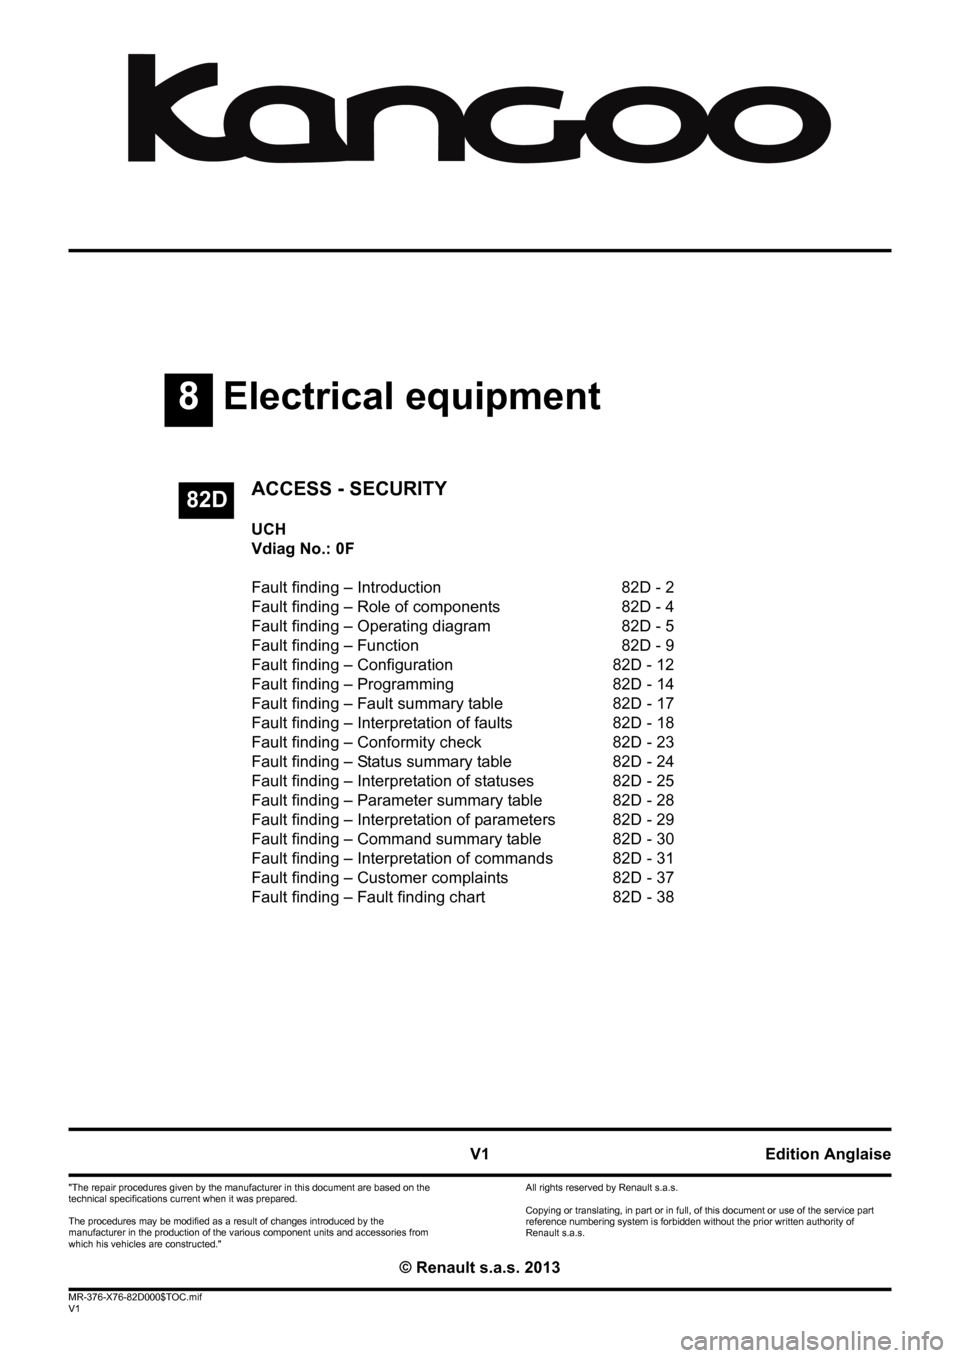 RENAULT KANGOO 2013 X61 / 2.G Access Security Workshop Manual 8Electrical equipment
V1 MR-376-X76-82D000$TOC.mif
V1
82D
"The repair procedures given by the manufacturer in this document are based on the 
technical specifications current when it was prepared.
The